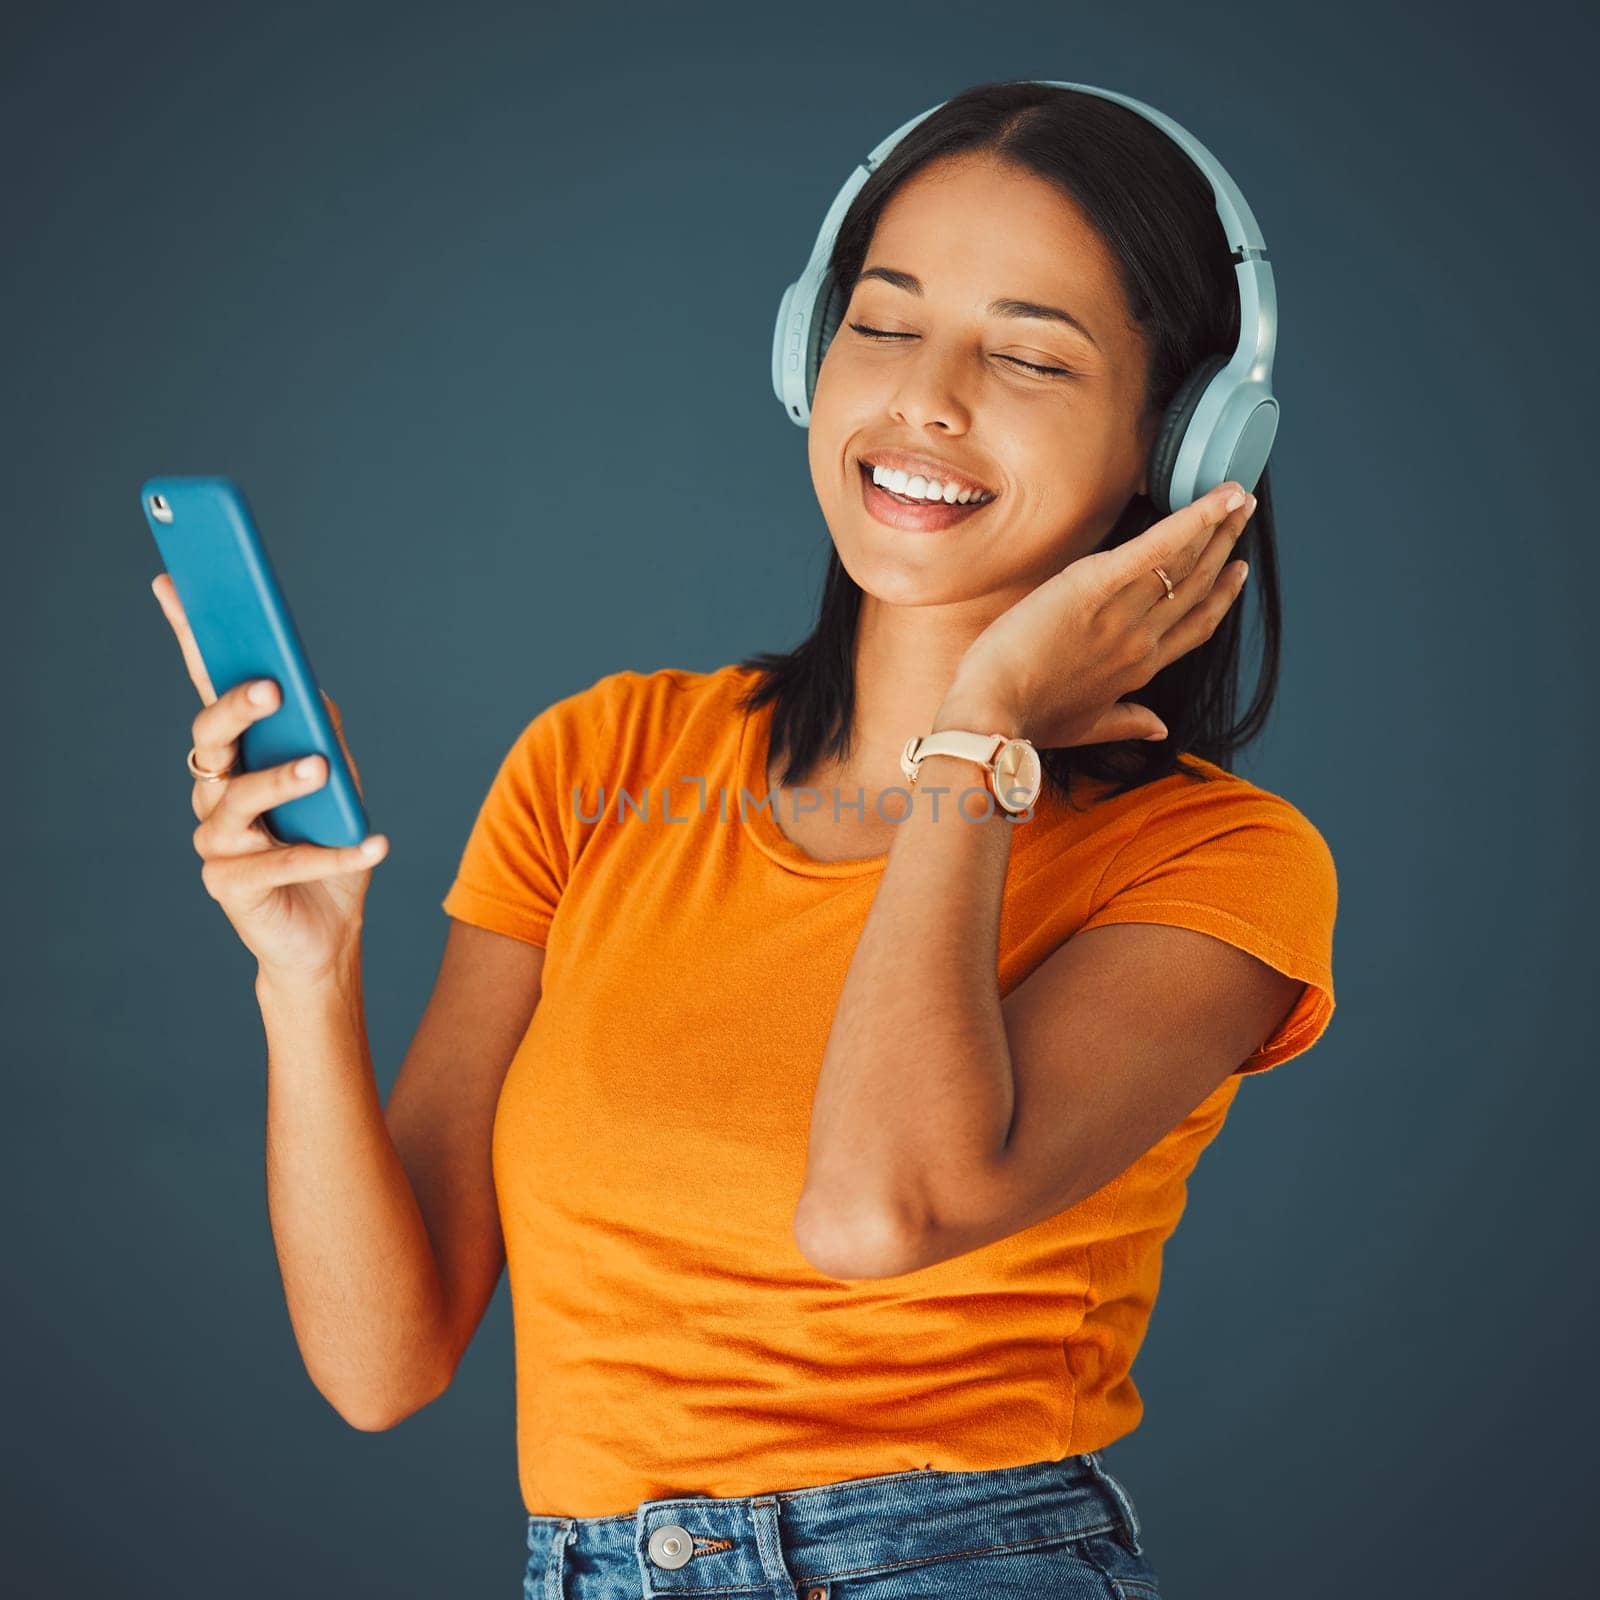 Radio, headphones and woman listening to music on phone or mobile app isolated against a studio background. Fun, sound and female enjoying and streaming a podcast or audio smiling and happy.